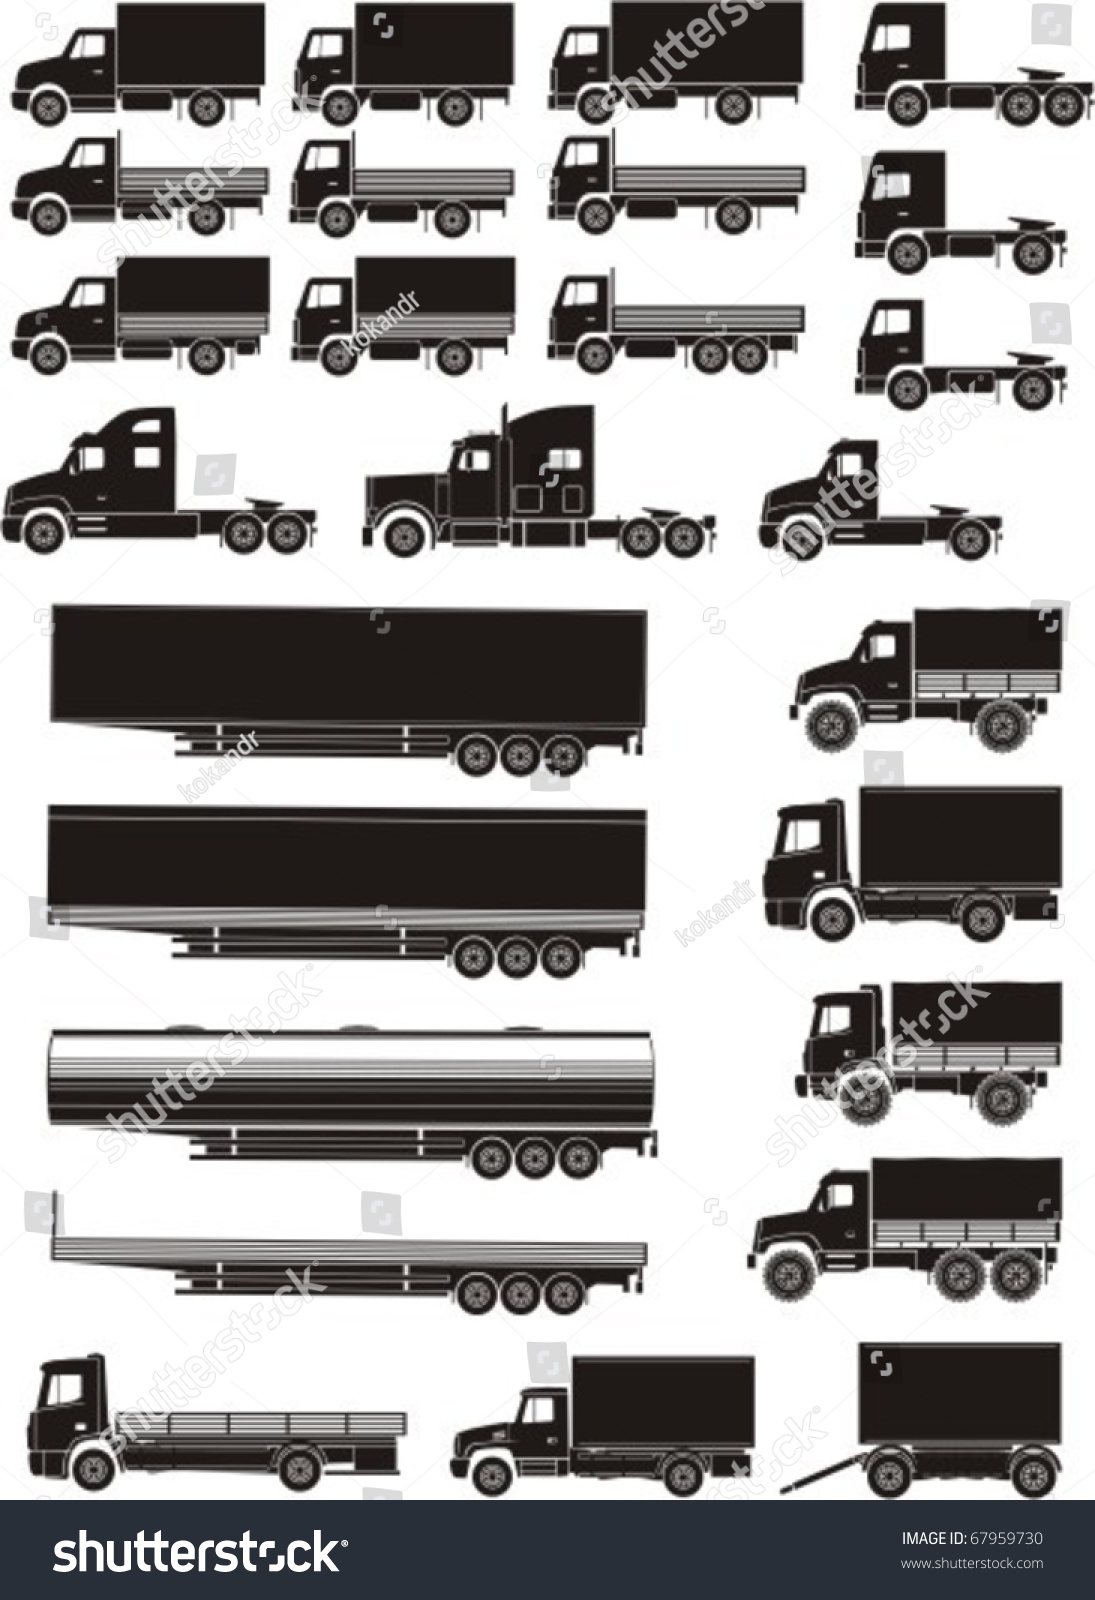 Set Of Lorry And Trailer Silhouettes Stock Vector Illustration 67959730 ...